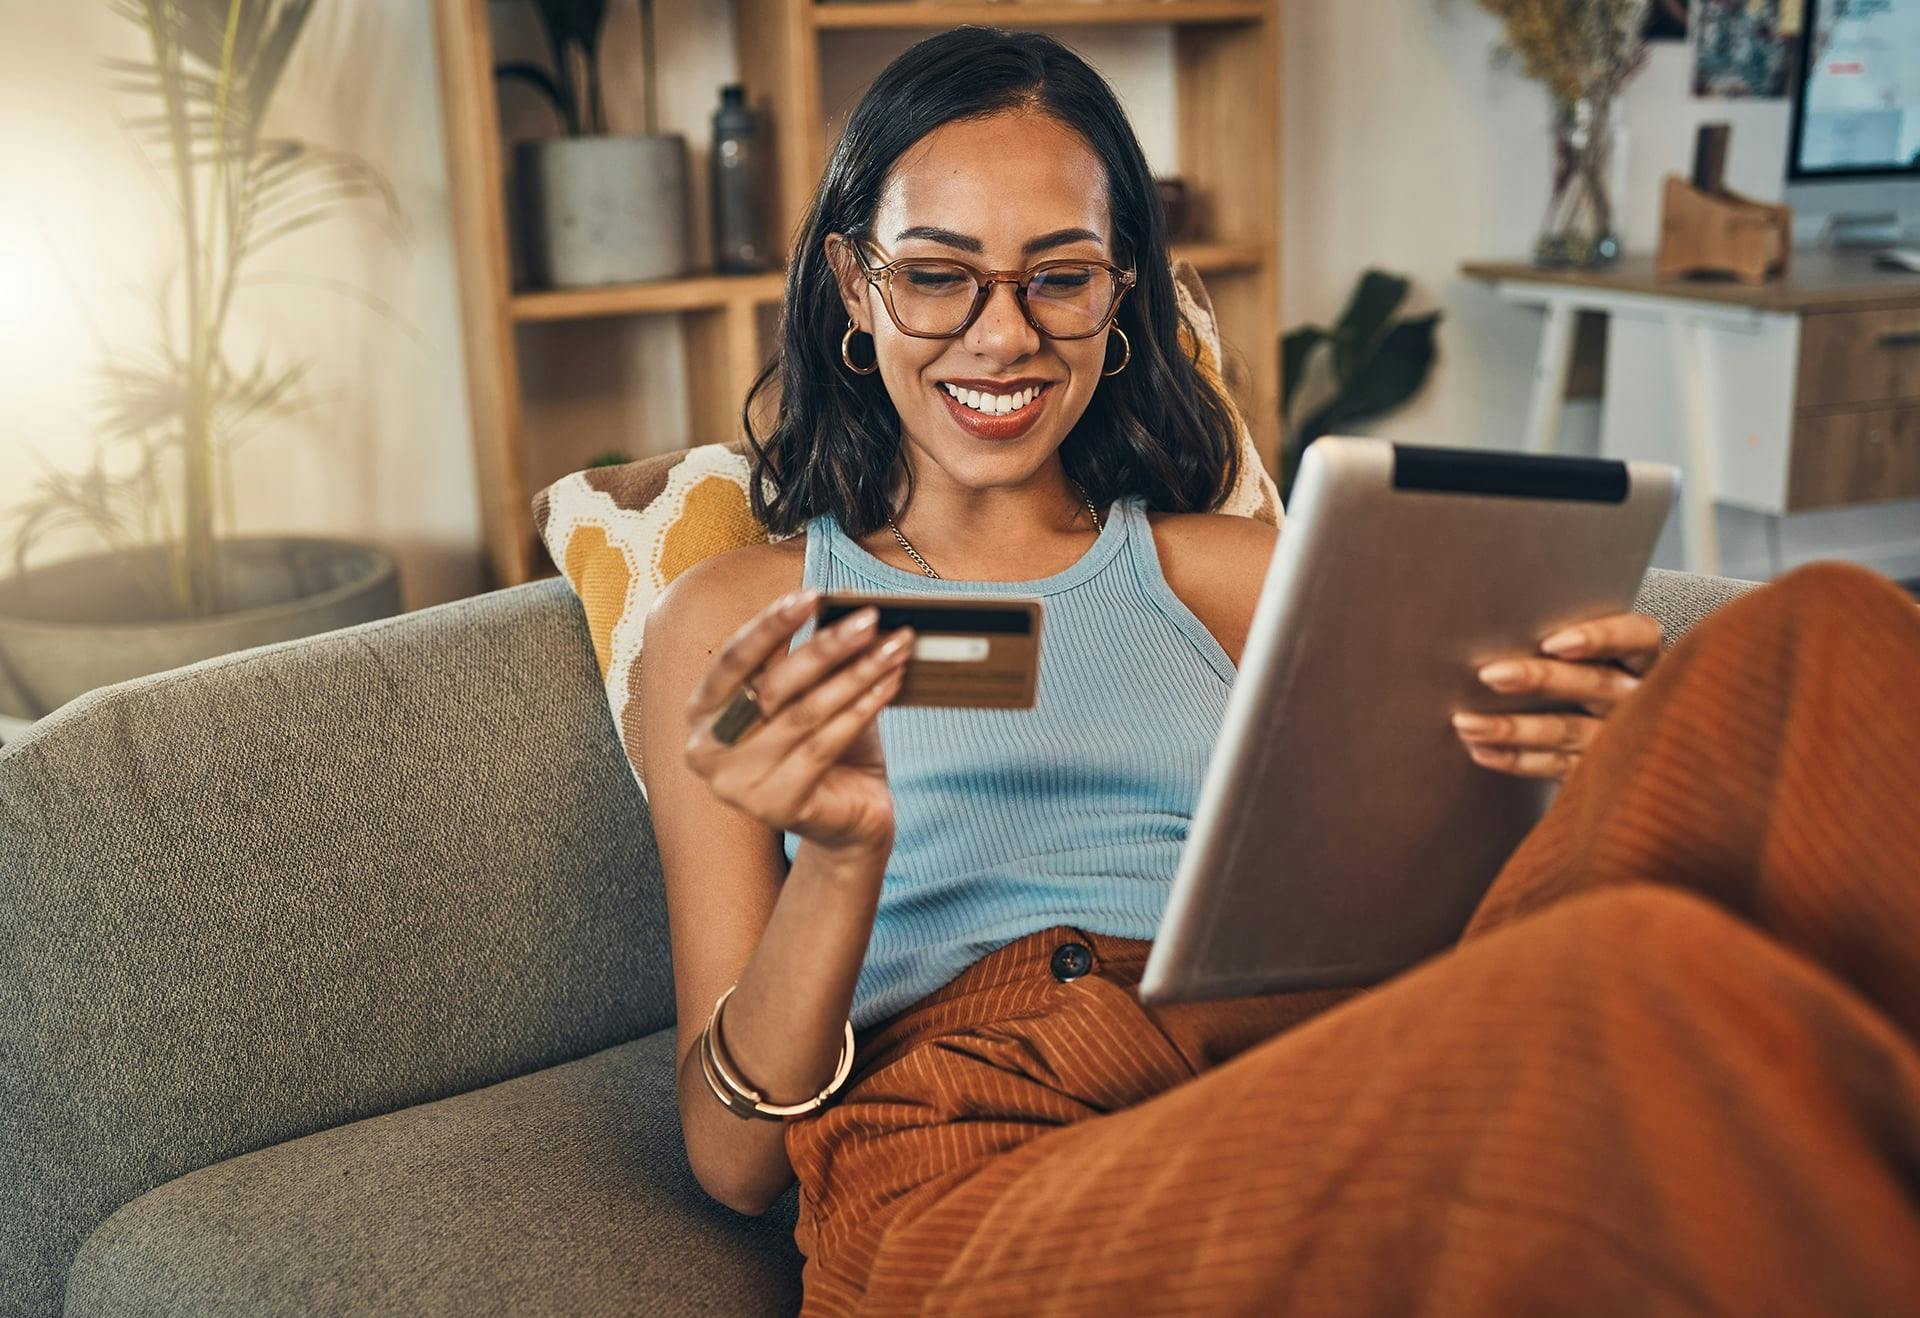 Woman holding a tablet and a credit card while sitting on a couch